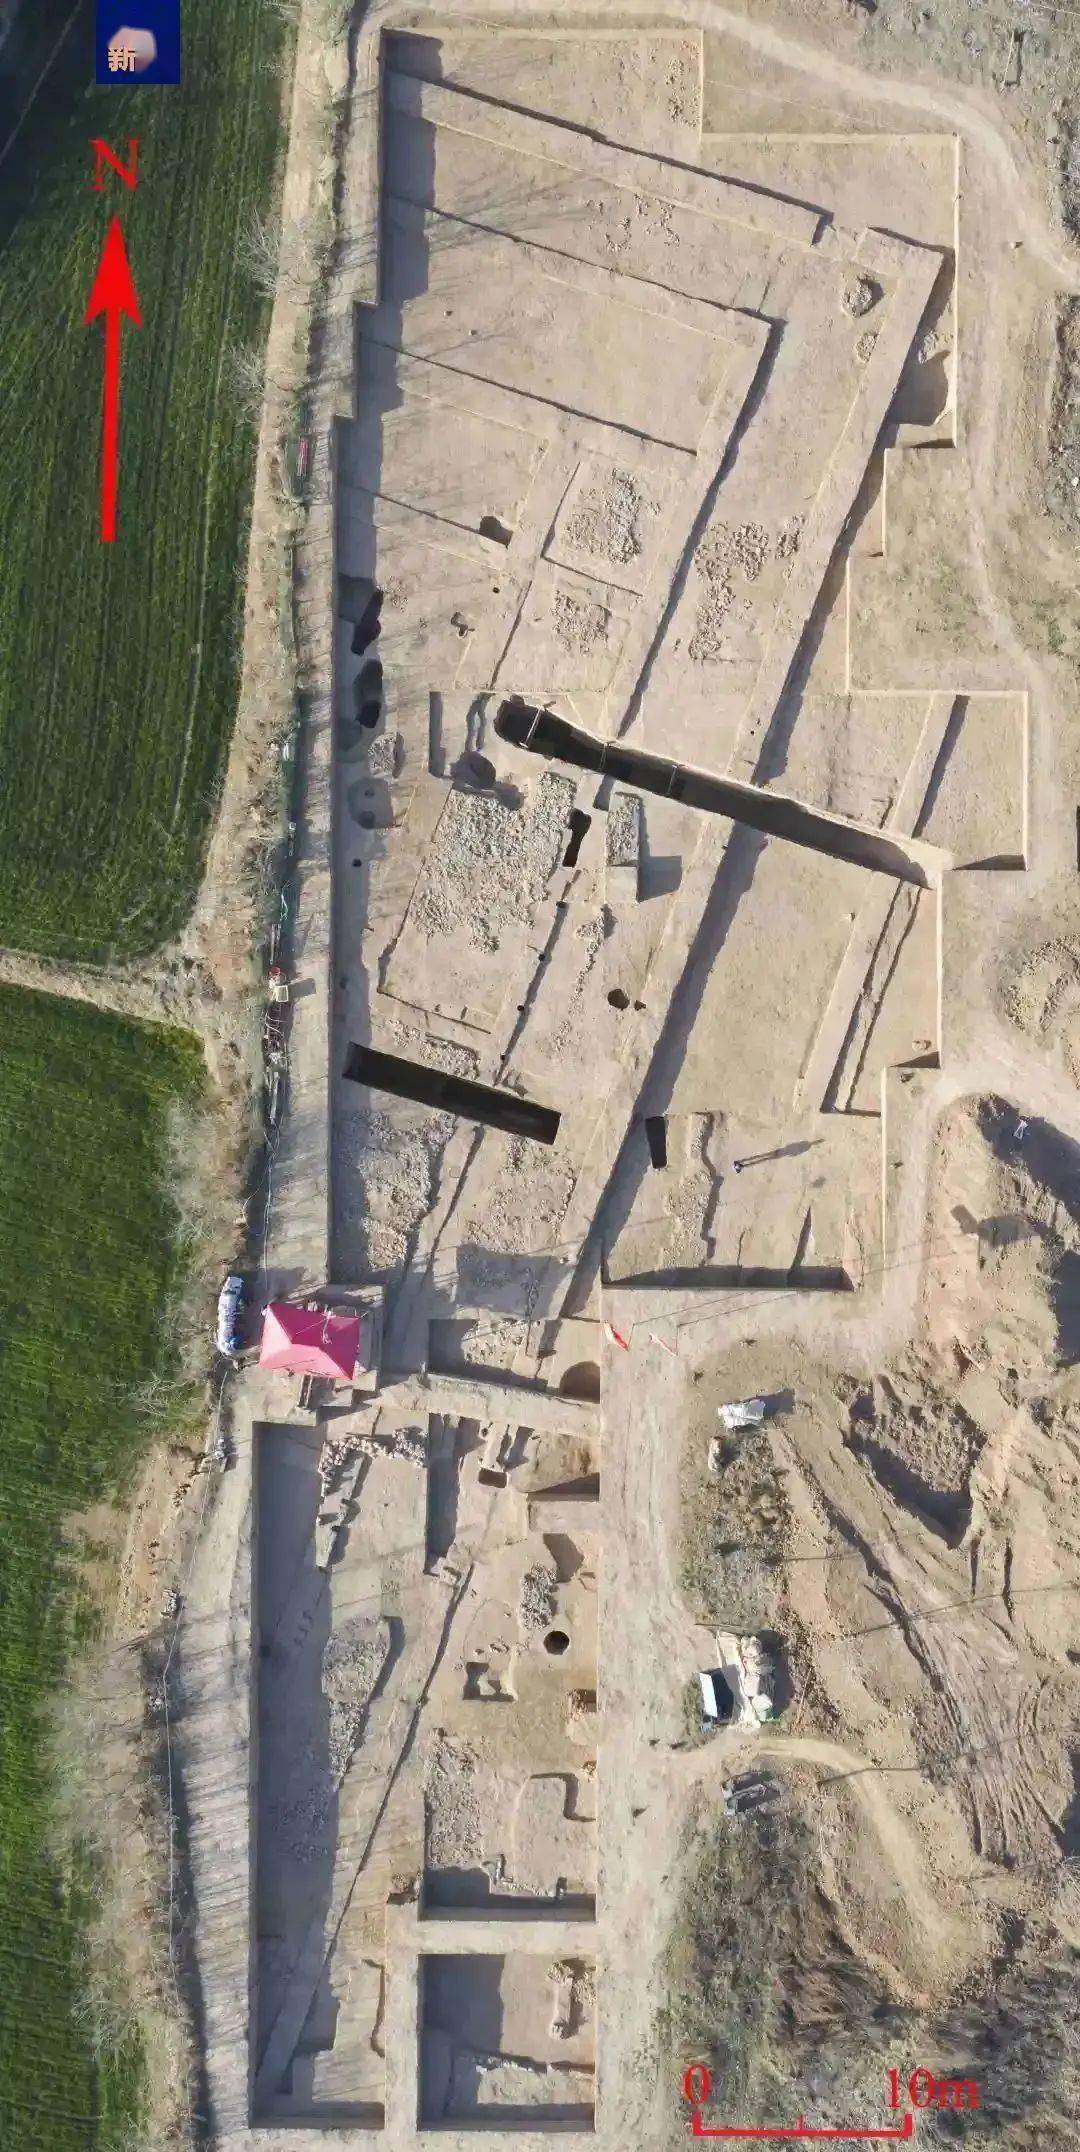 A large architectural site of the Qin State during the Spring and Autumn Period has been discovered. Dont you want to know more about it?